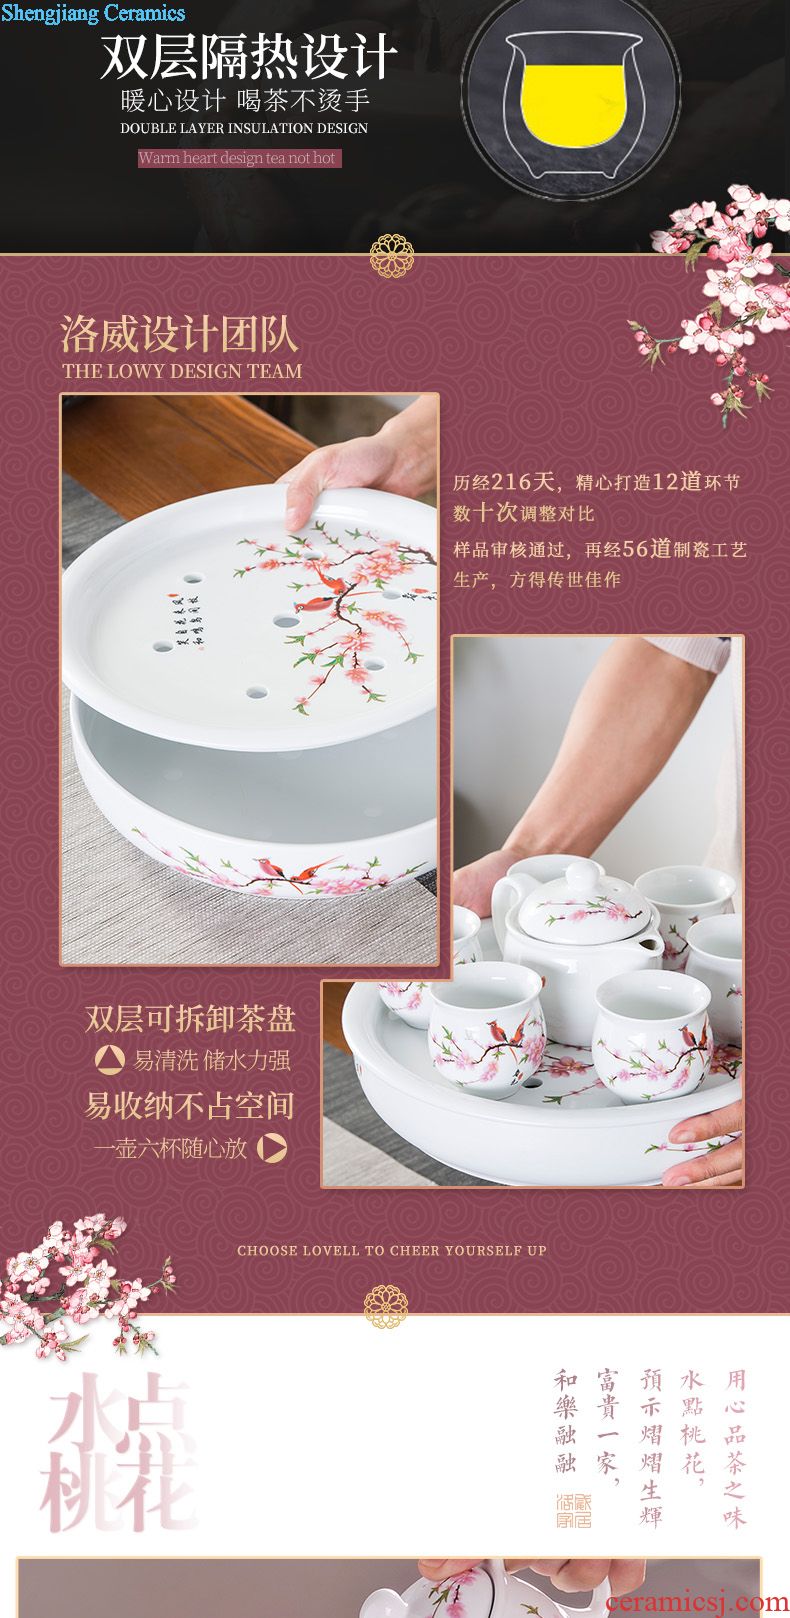 Blower, tea set Contemporary and contracted household of Chinese style of jingdezhen kung fu tea cups Ceramic lid bowl